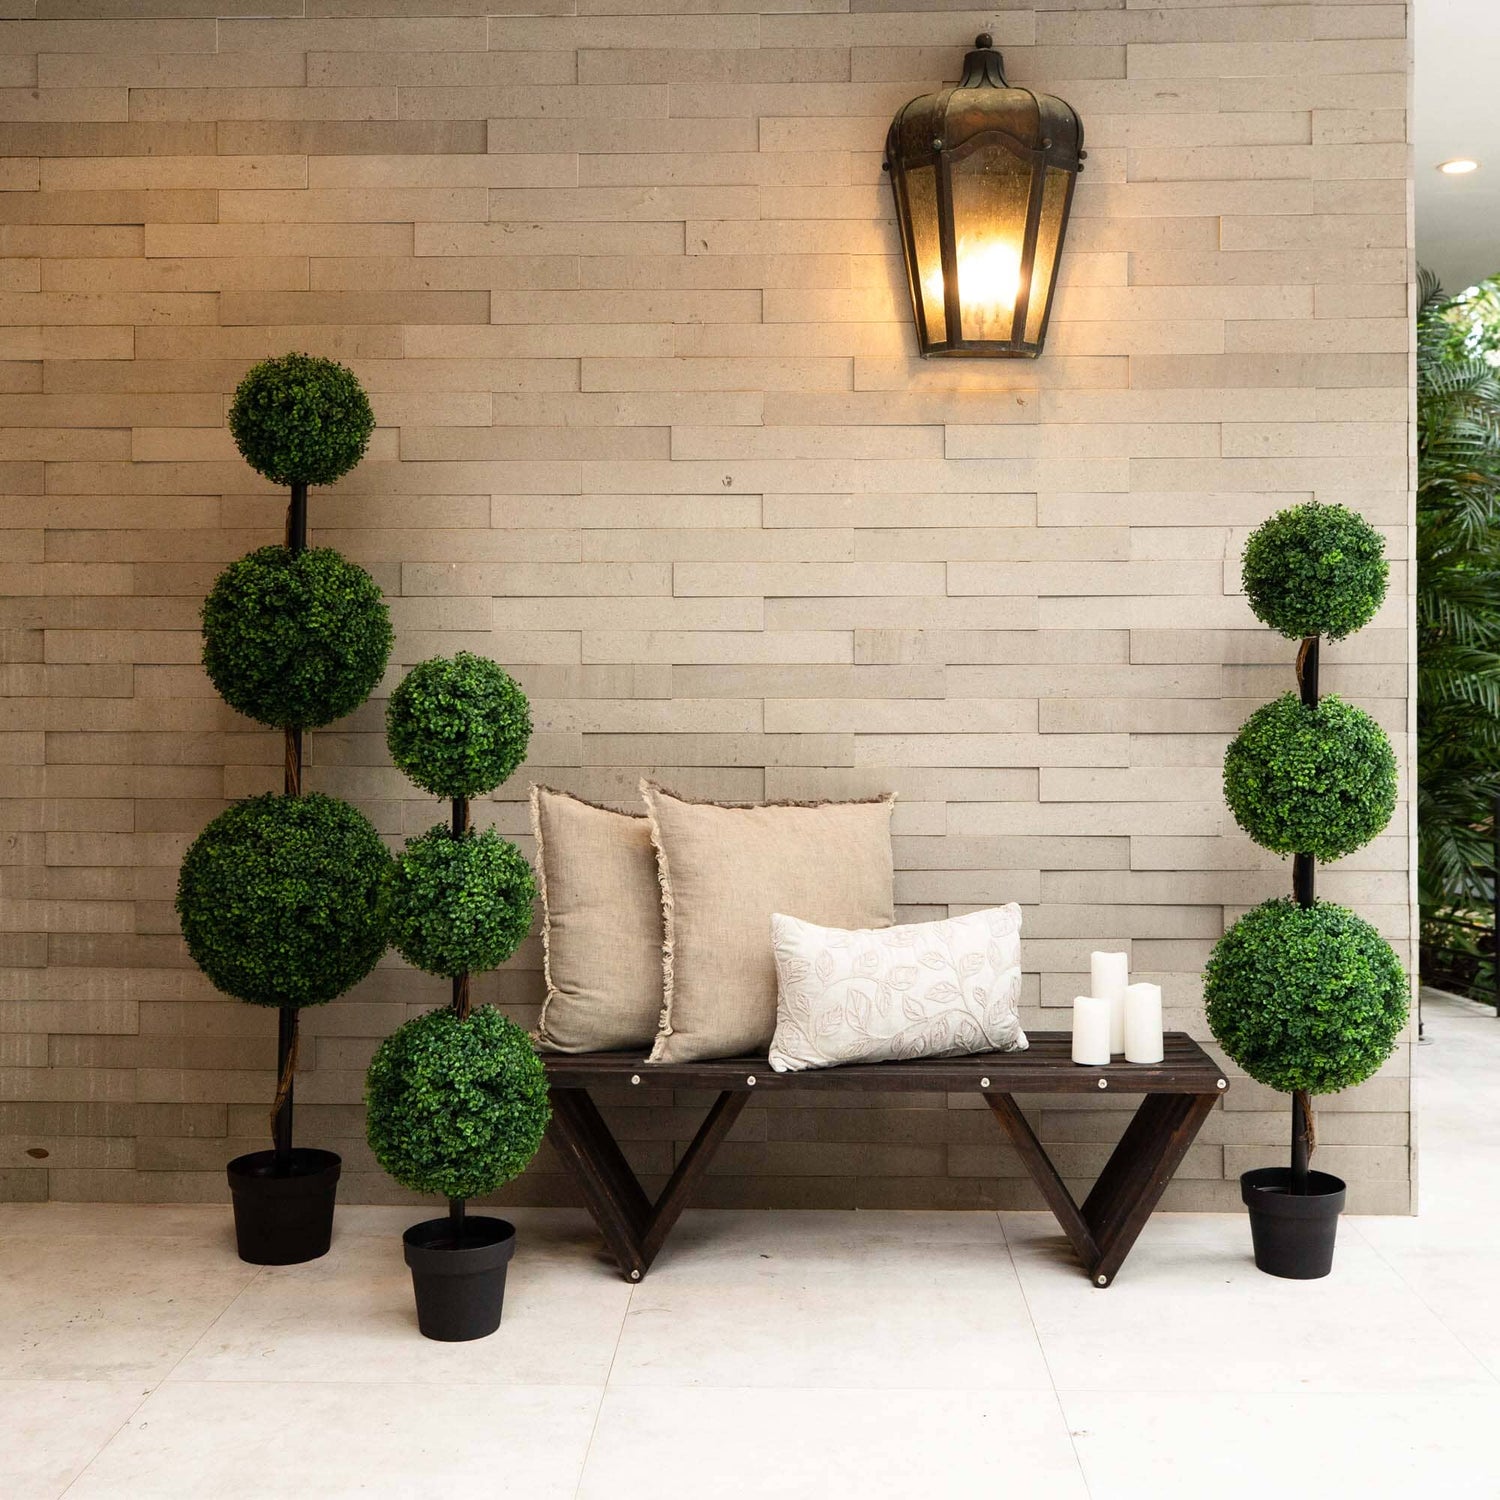 6’ Artificial Triple Ball Boxwood Topiary Tree (Indoor/Outdoor)